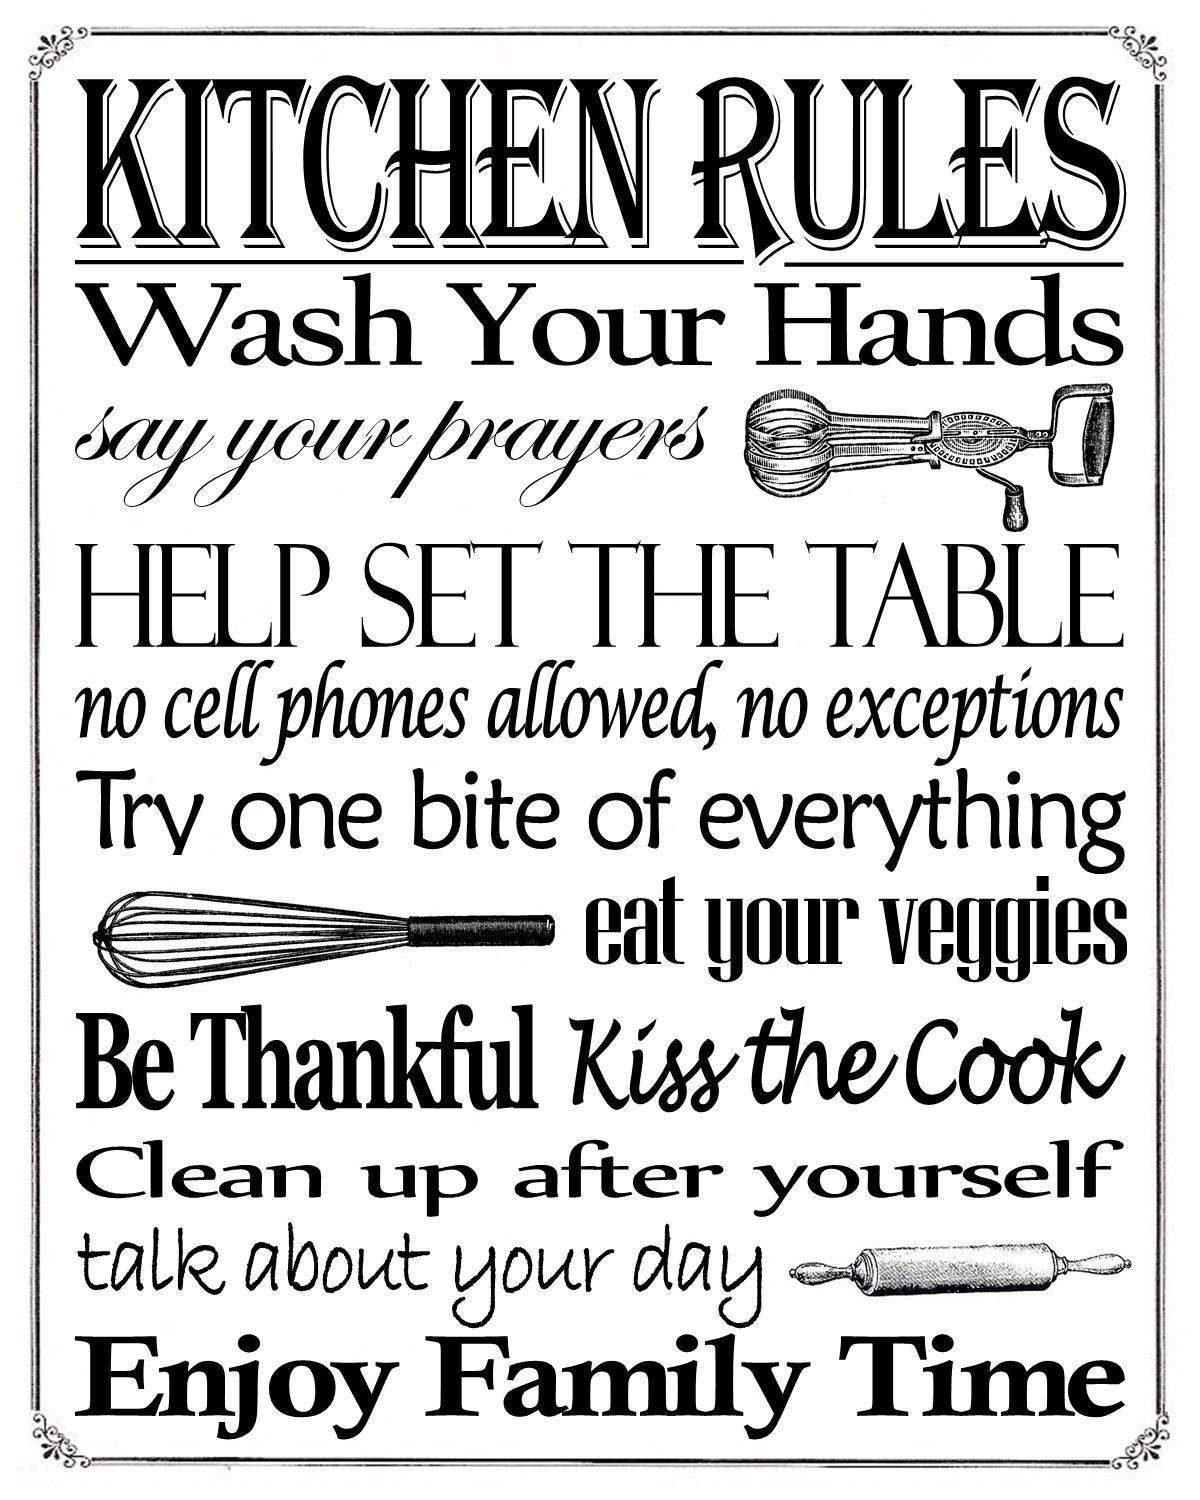 Free Wash Your Hands Signs Printable (75+ Images In Collection) Page 1 - Free Wash Your Hands Signs Printable